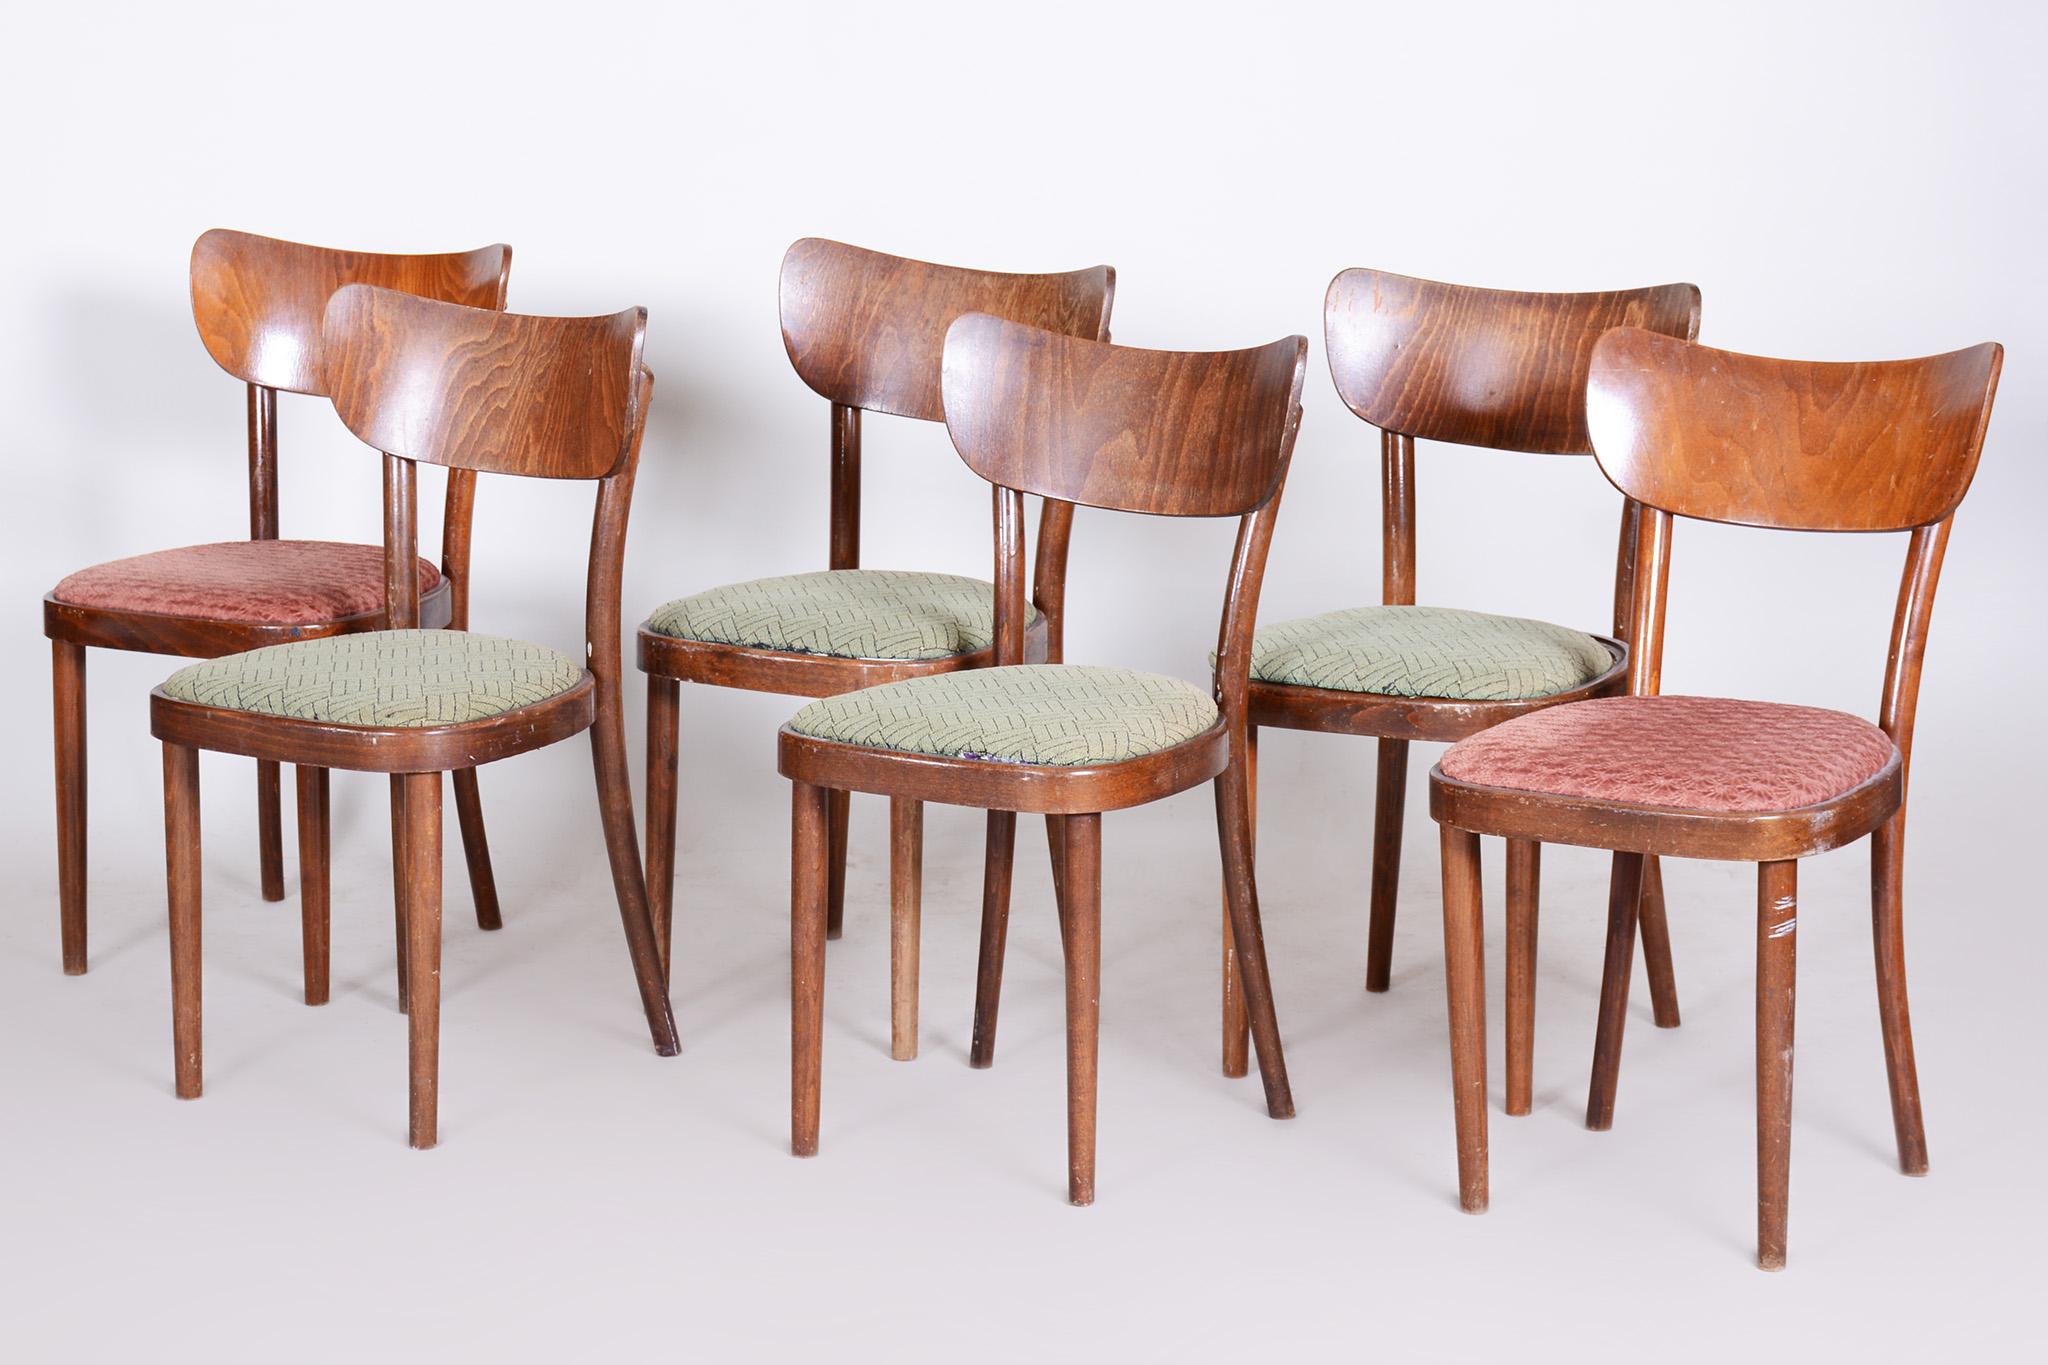 Art Deco Set of 6 Dining Chairs Made by TON - 1940s, Czechia For Sale